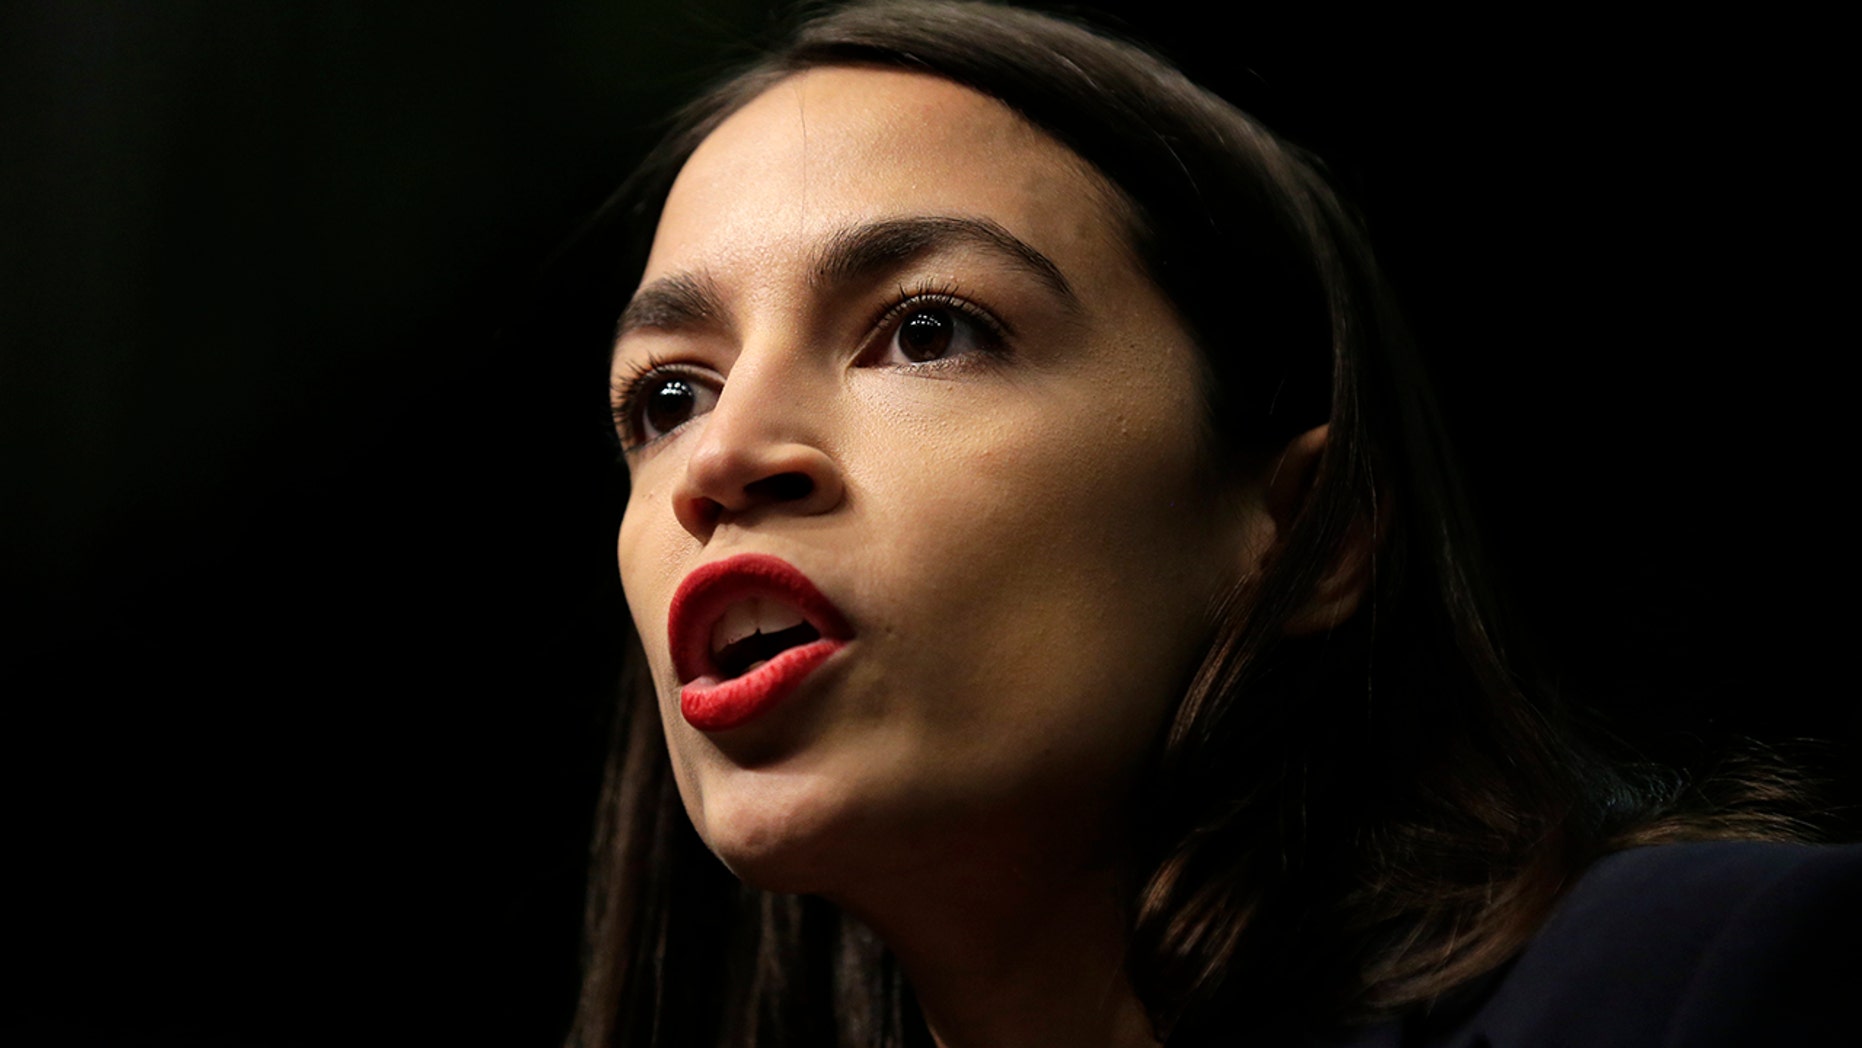 Rep. Alexandria Ocasio-Cortez, D-N.Y., speaks during the National Action Network Convention in New York, Friday, April 5, 2019. (AP Photo/Seth Wenig)